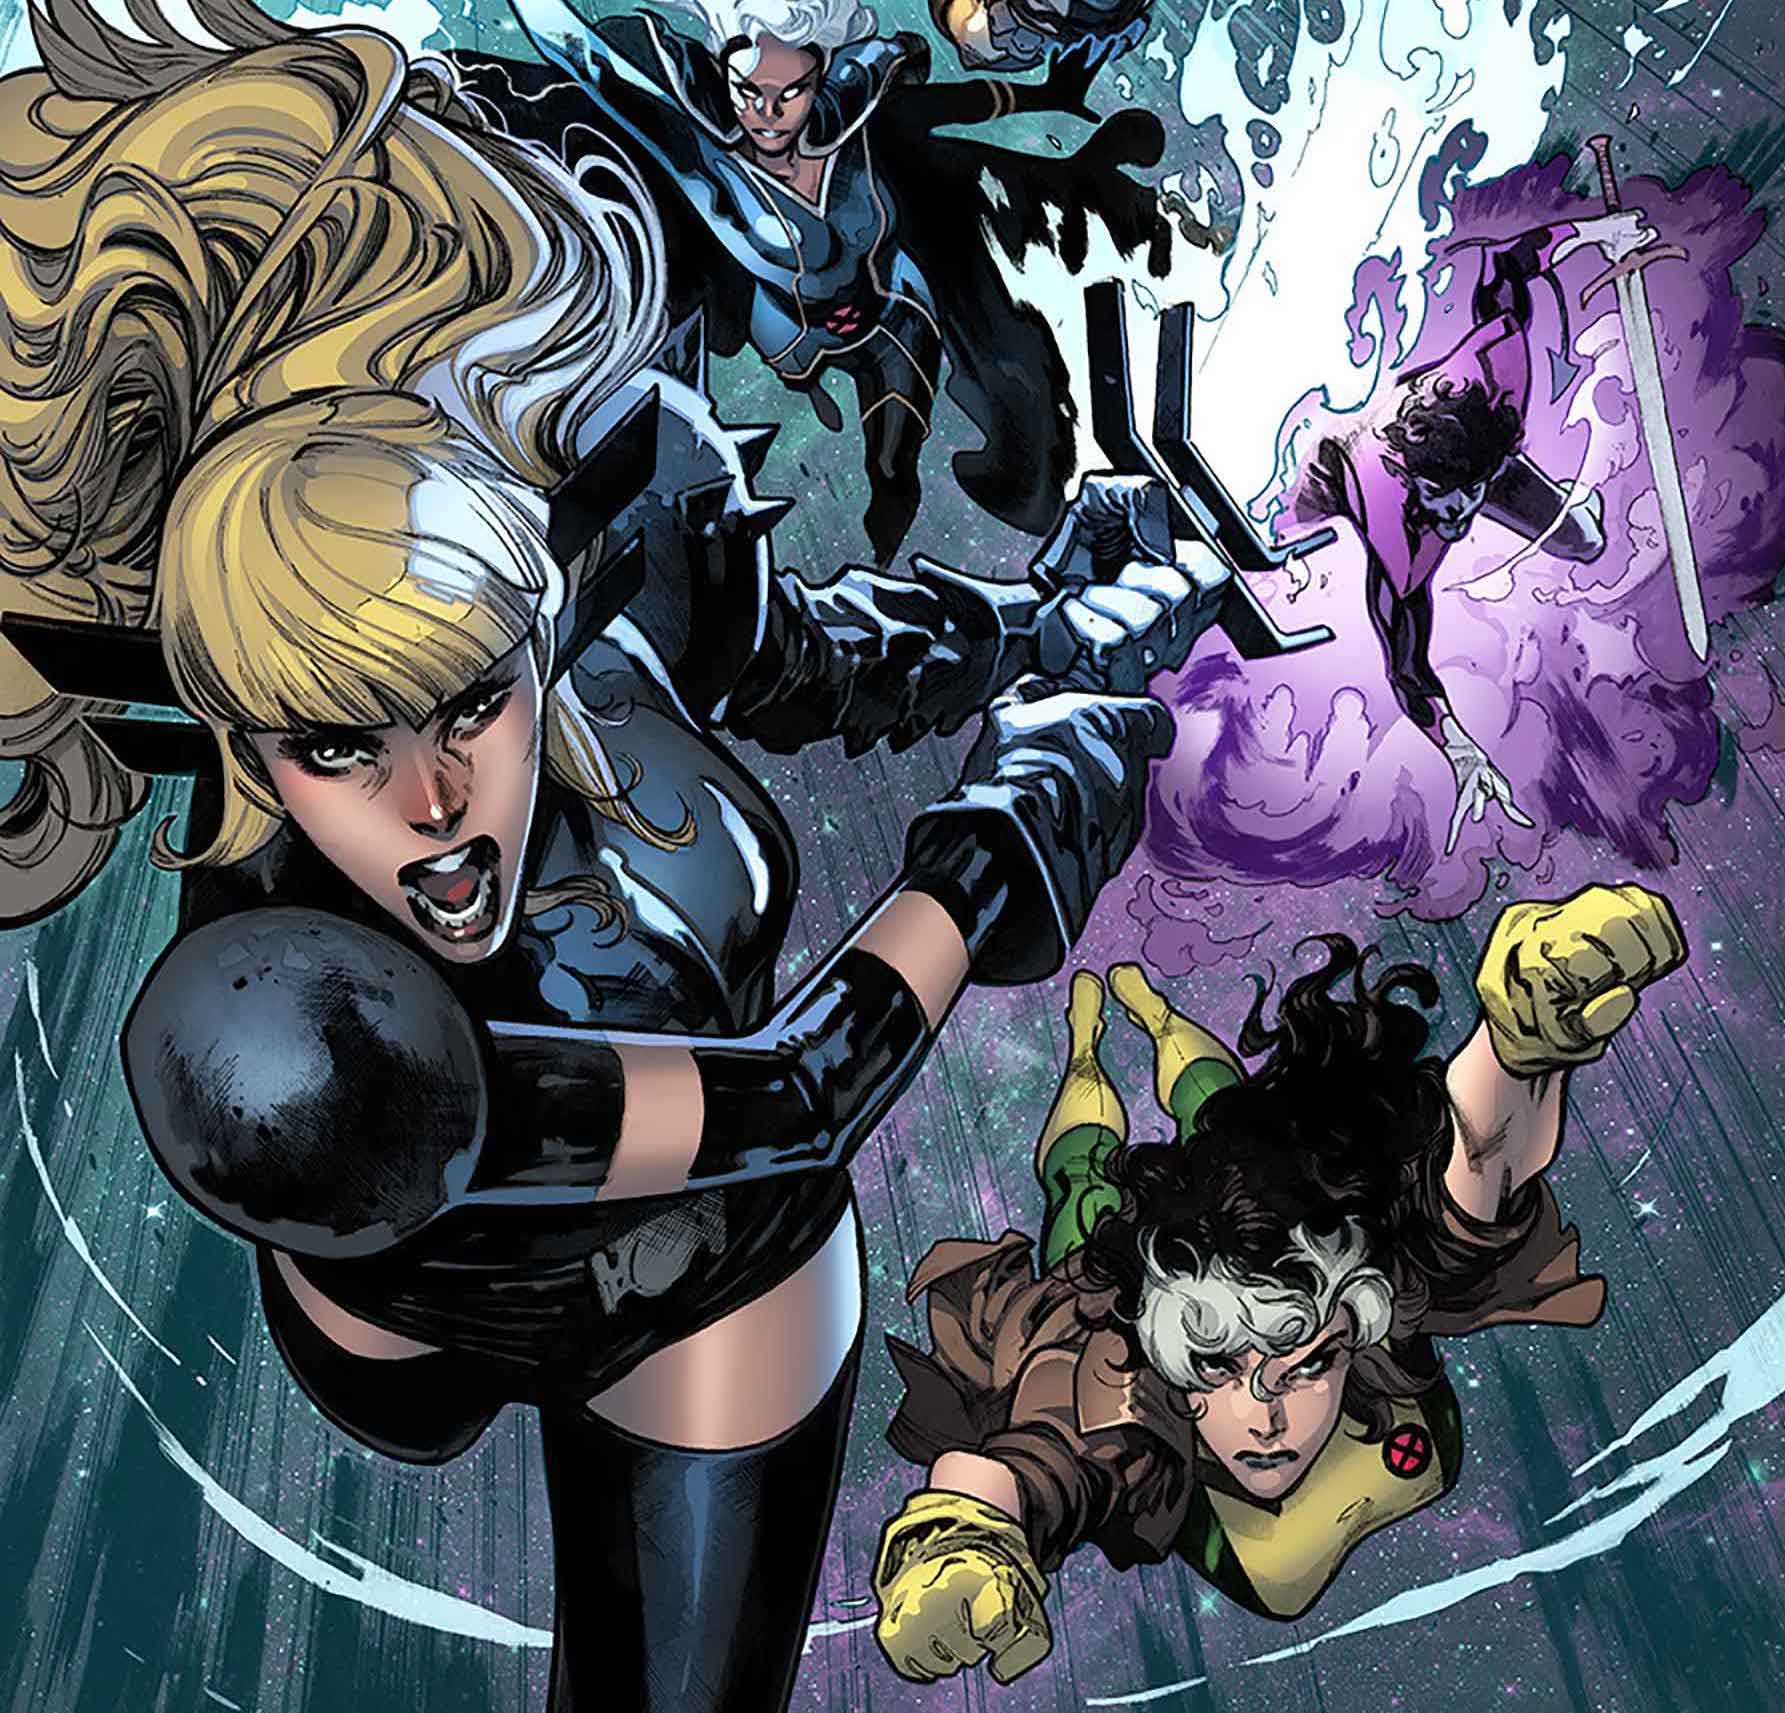 X-Men First Look: X-Men Free Comic Book Day cover revealed featuring Magik, Rogue, Wolverine, and more